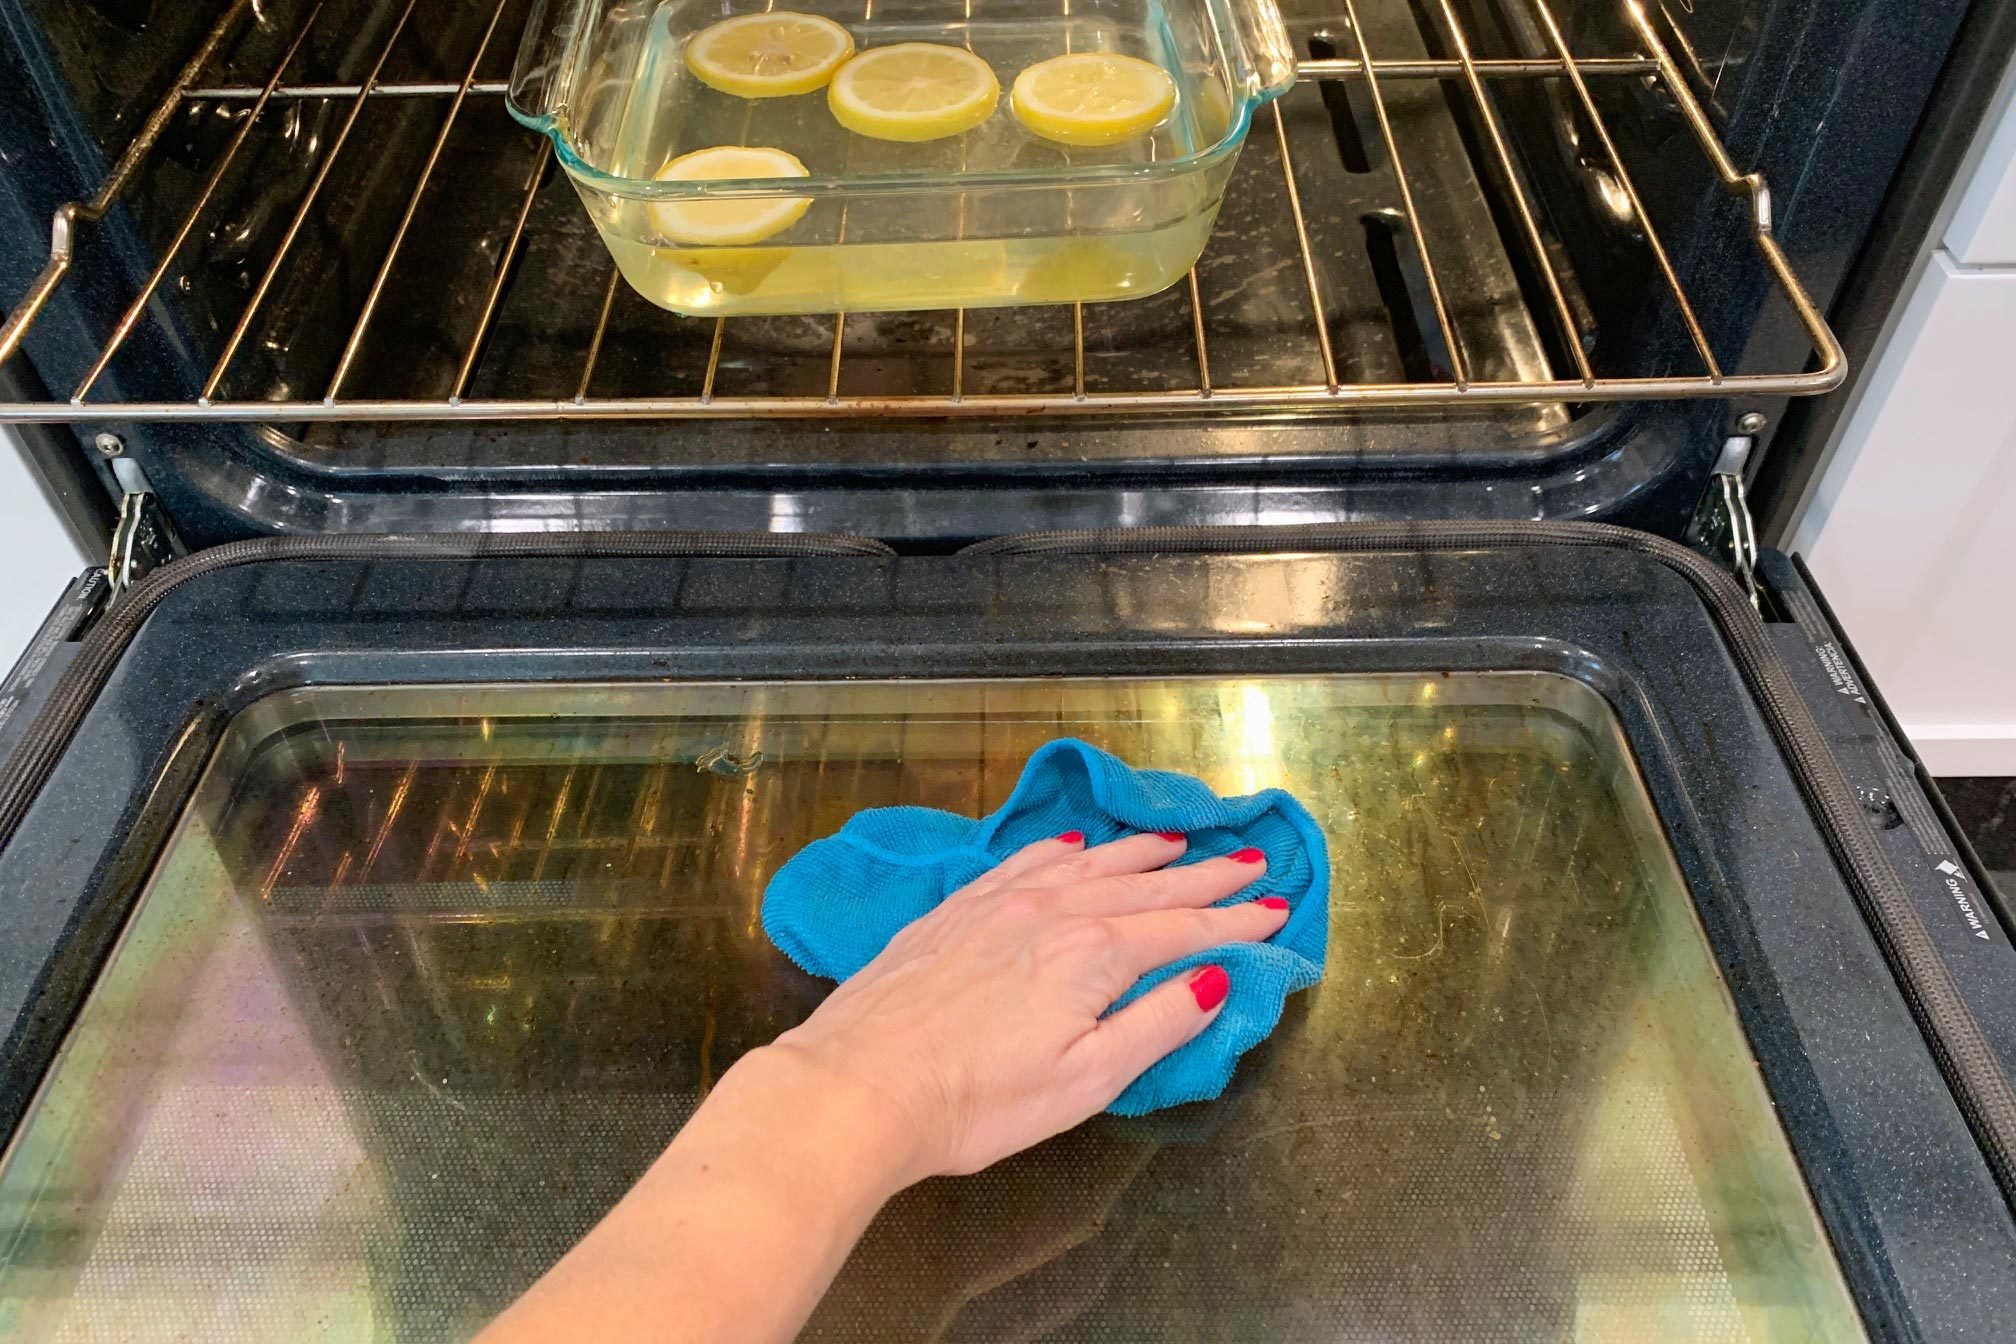 wiping oven with a a blue rag